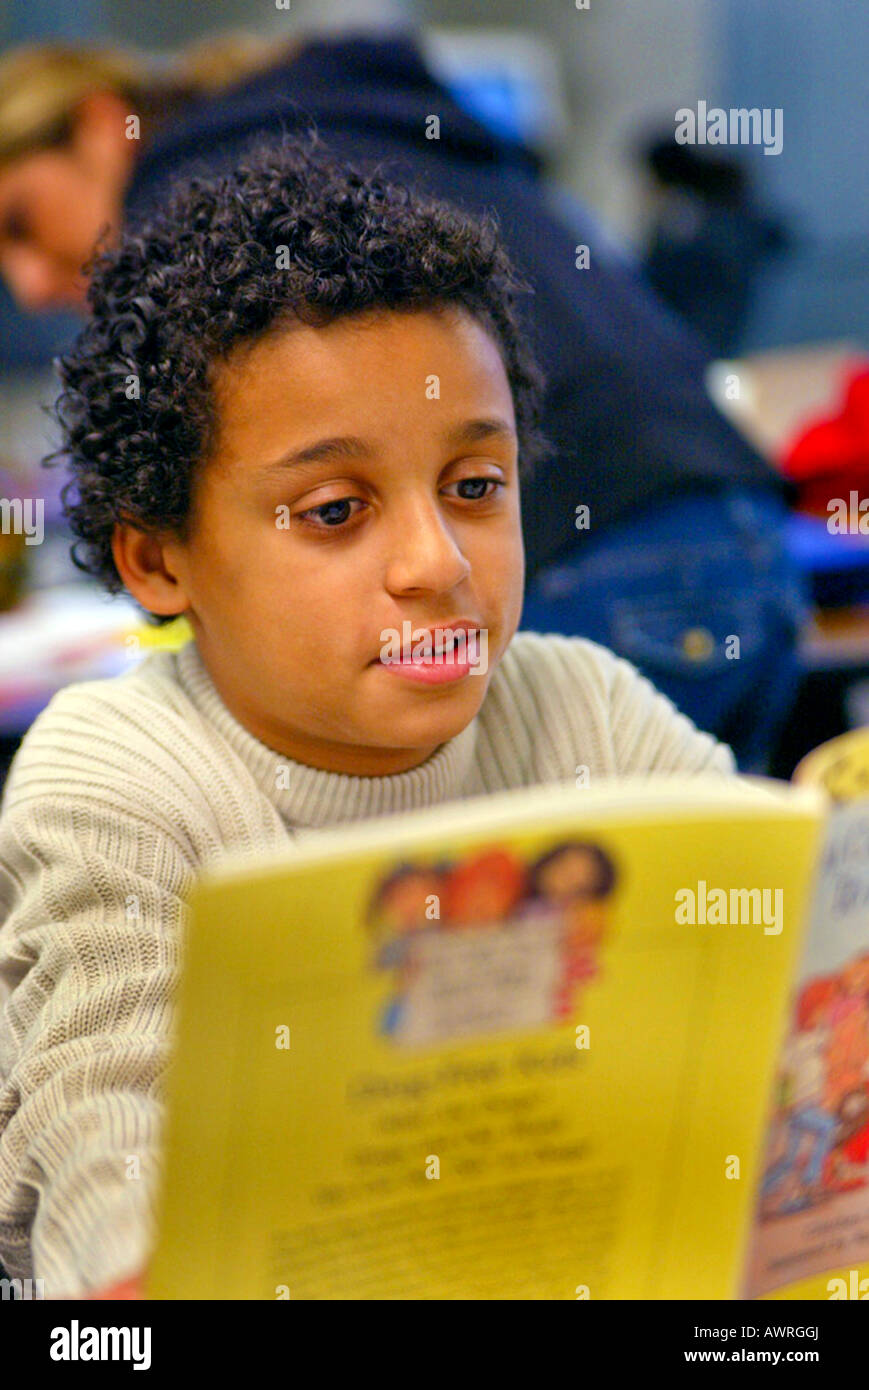 Black boy reads book at recreation center Model released Stock Photo